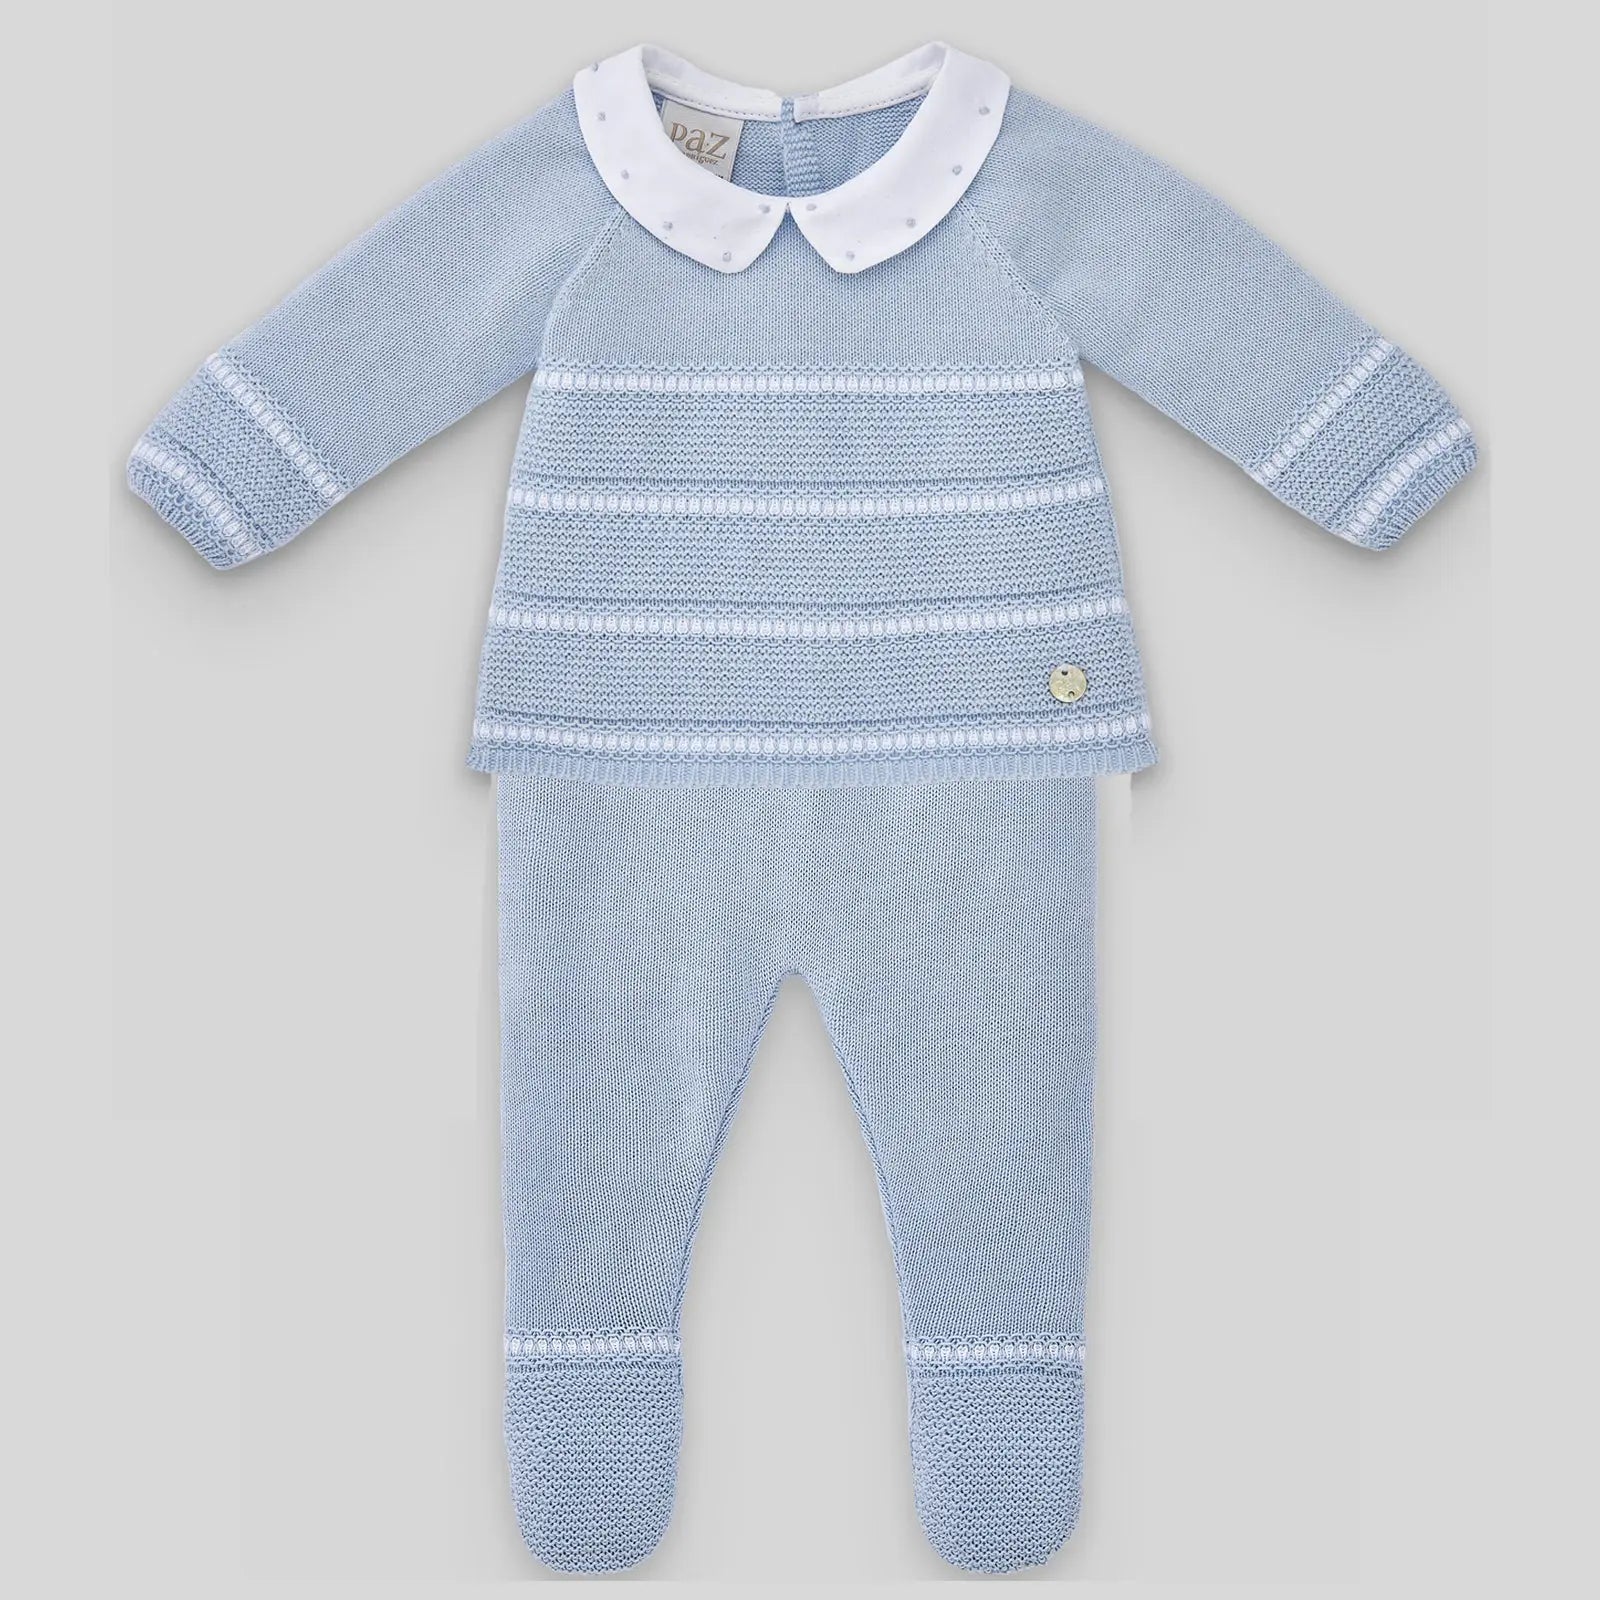 Blue Almonds Ltd Boy's Knitted Footed Set in Sky Blue & White Blue Almonds